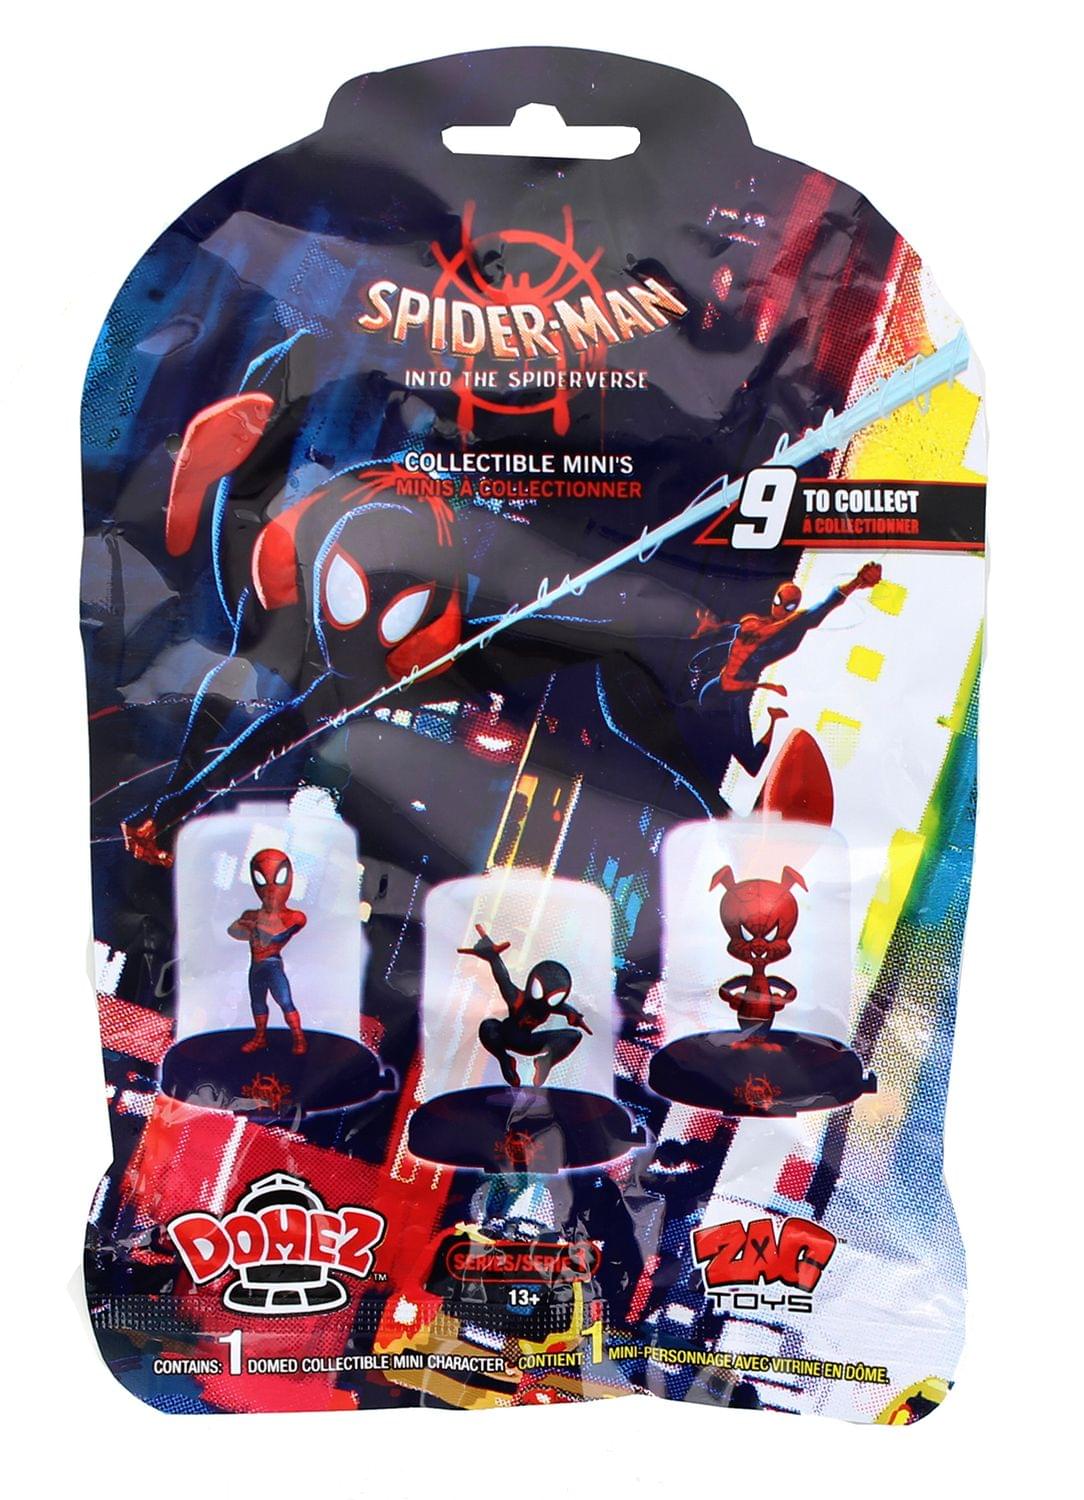 Marvel Spider-Man Spiderverse Domez Collectible Minis - Case of 24